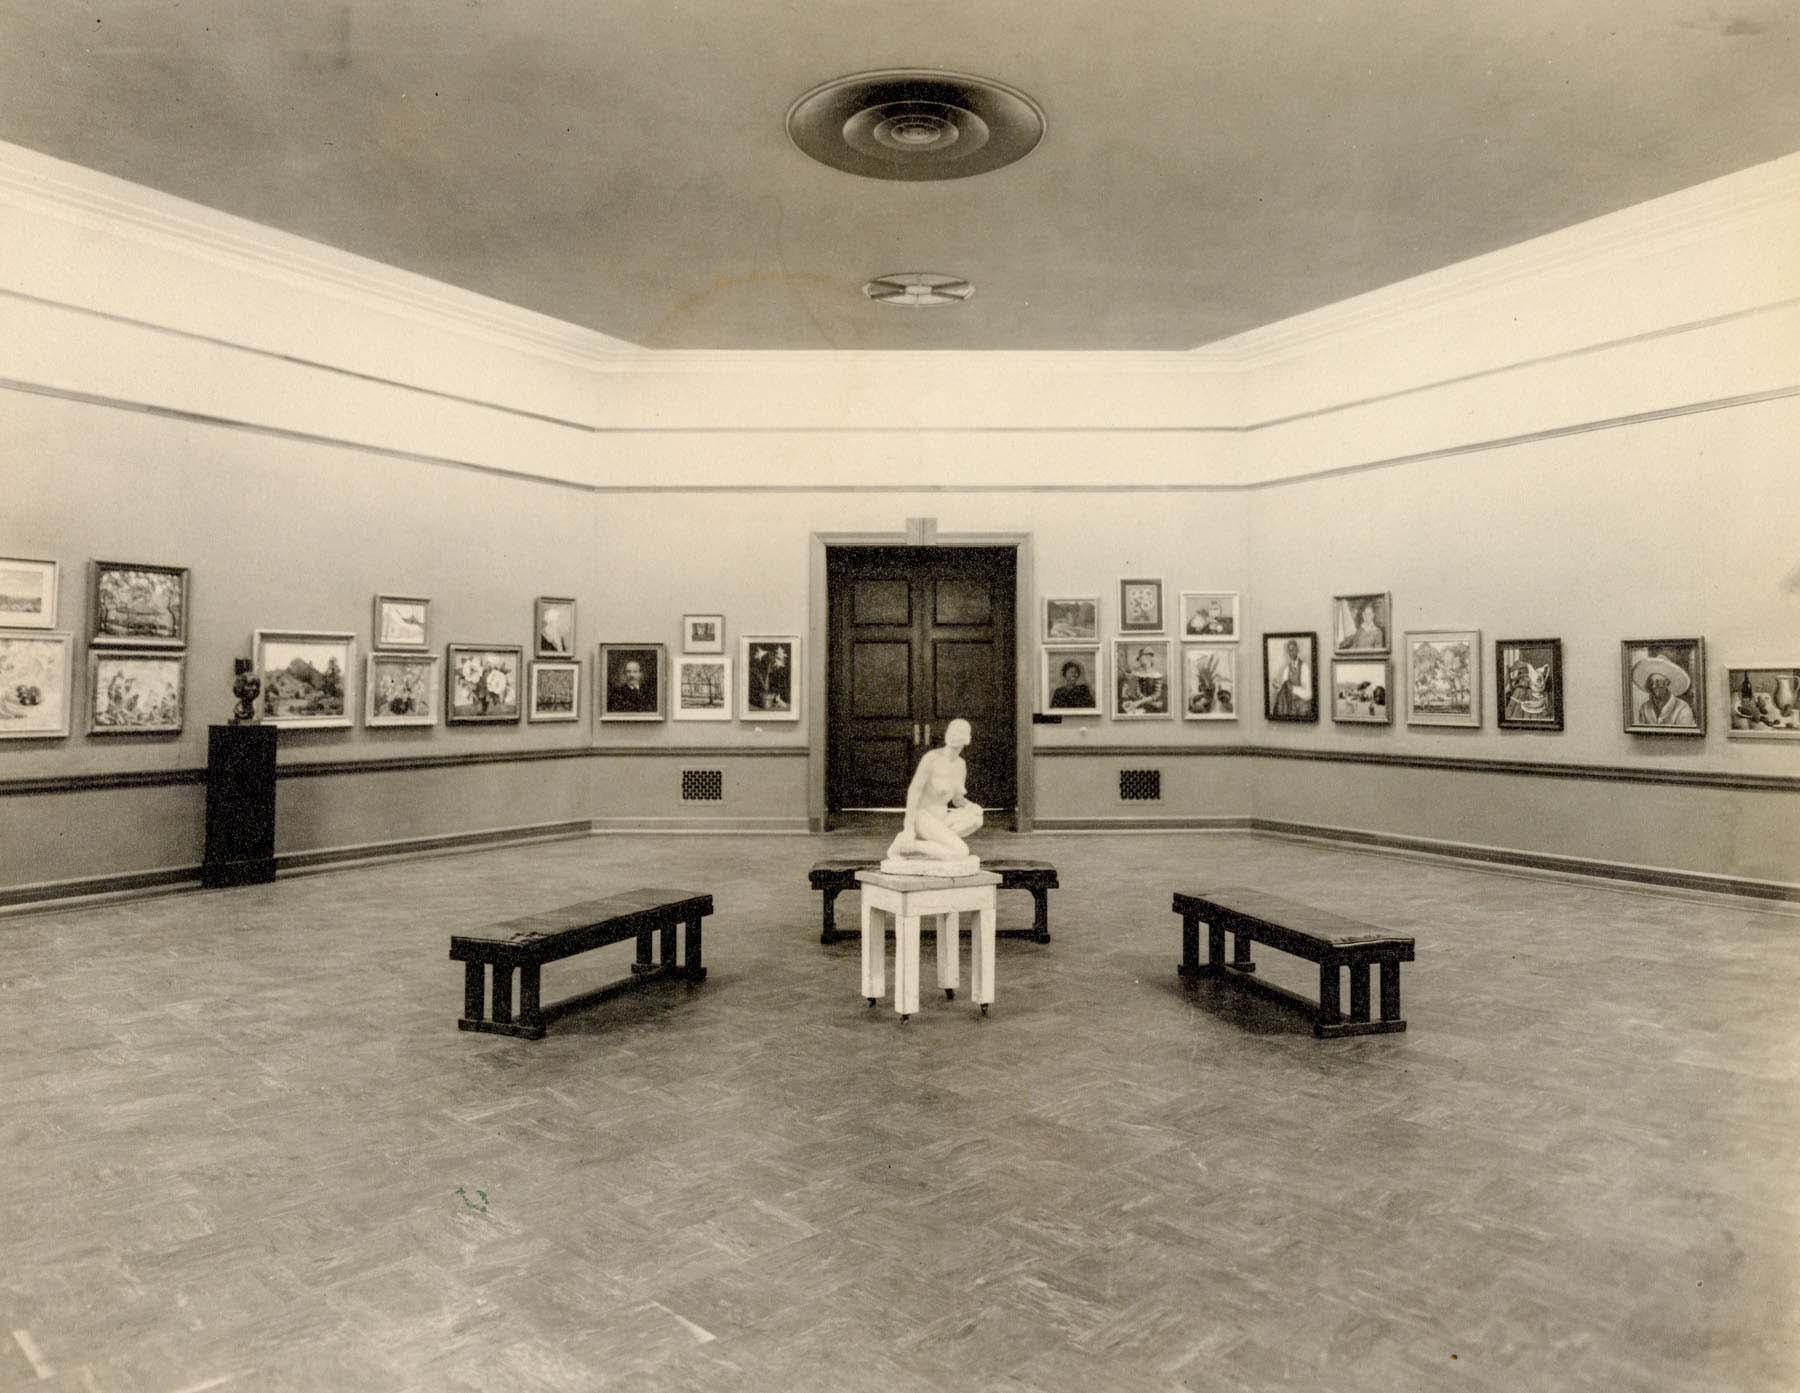 Black-and-white photo of a gallery with artwork on the walls and benches in the center arranged around a sculpture on a pedestal.